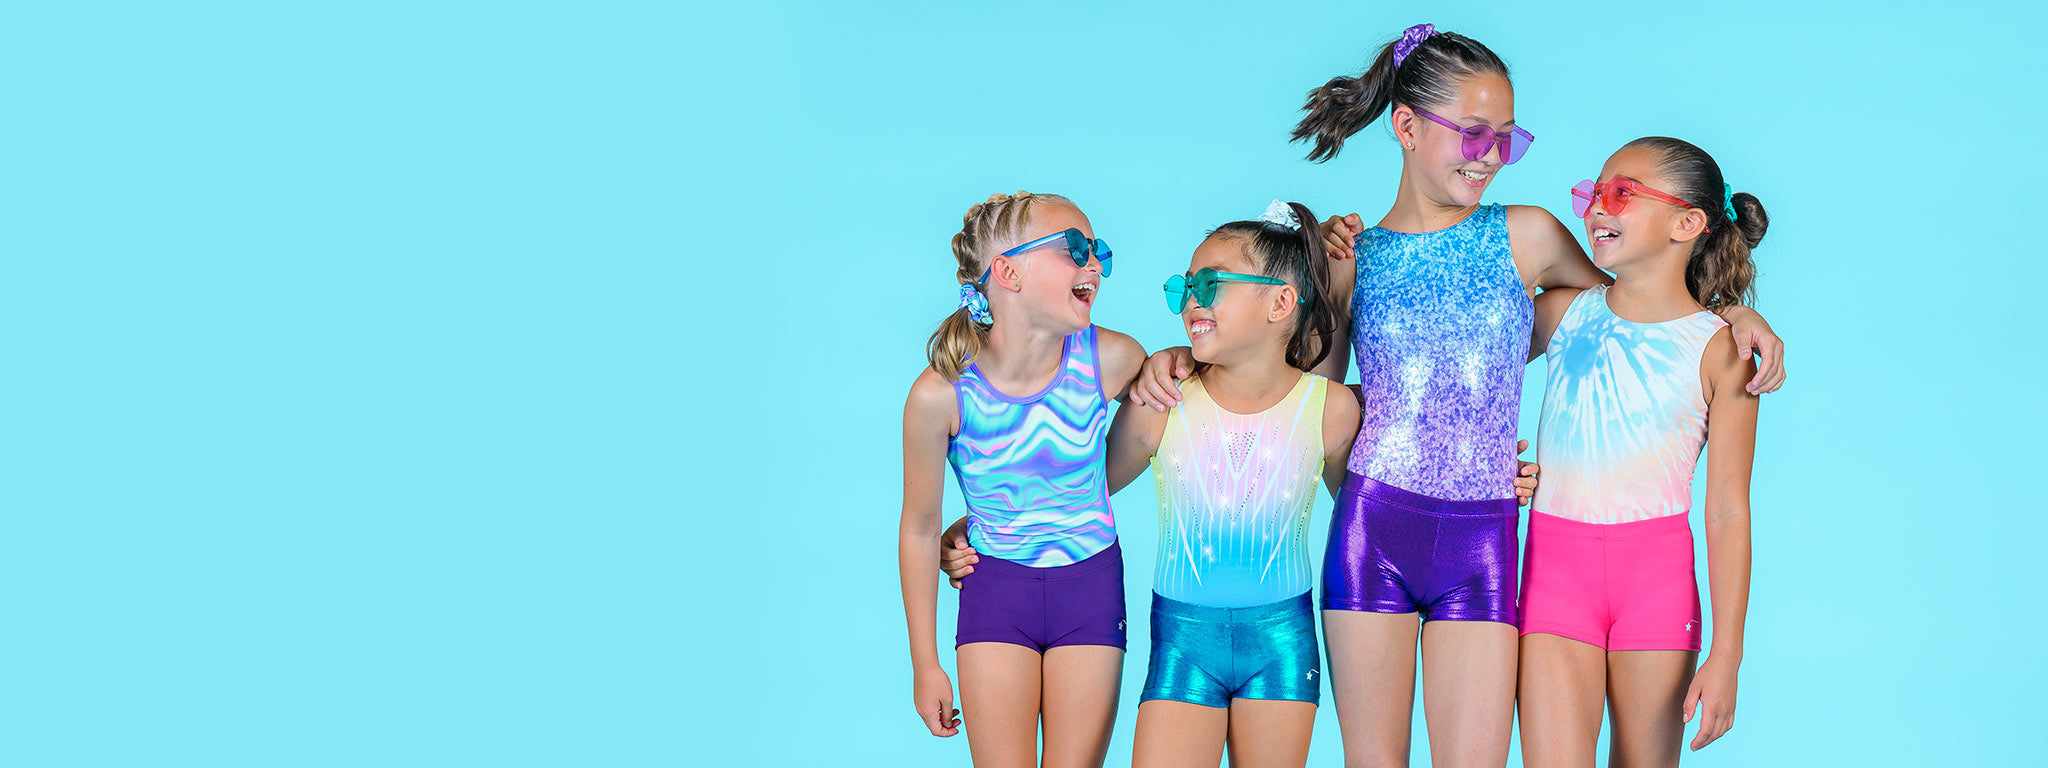 Four tween girls wearing pastel blue, purple, and rainbow leotards with pink, purple, and aqua matte and metallic shorts and jelly sunglasses stand and laugh with their arms around each other in front of a sky blue solid background.